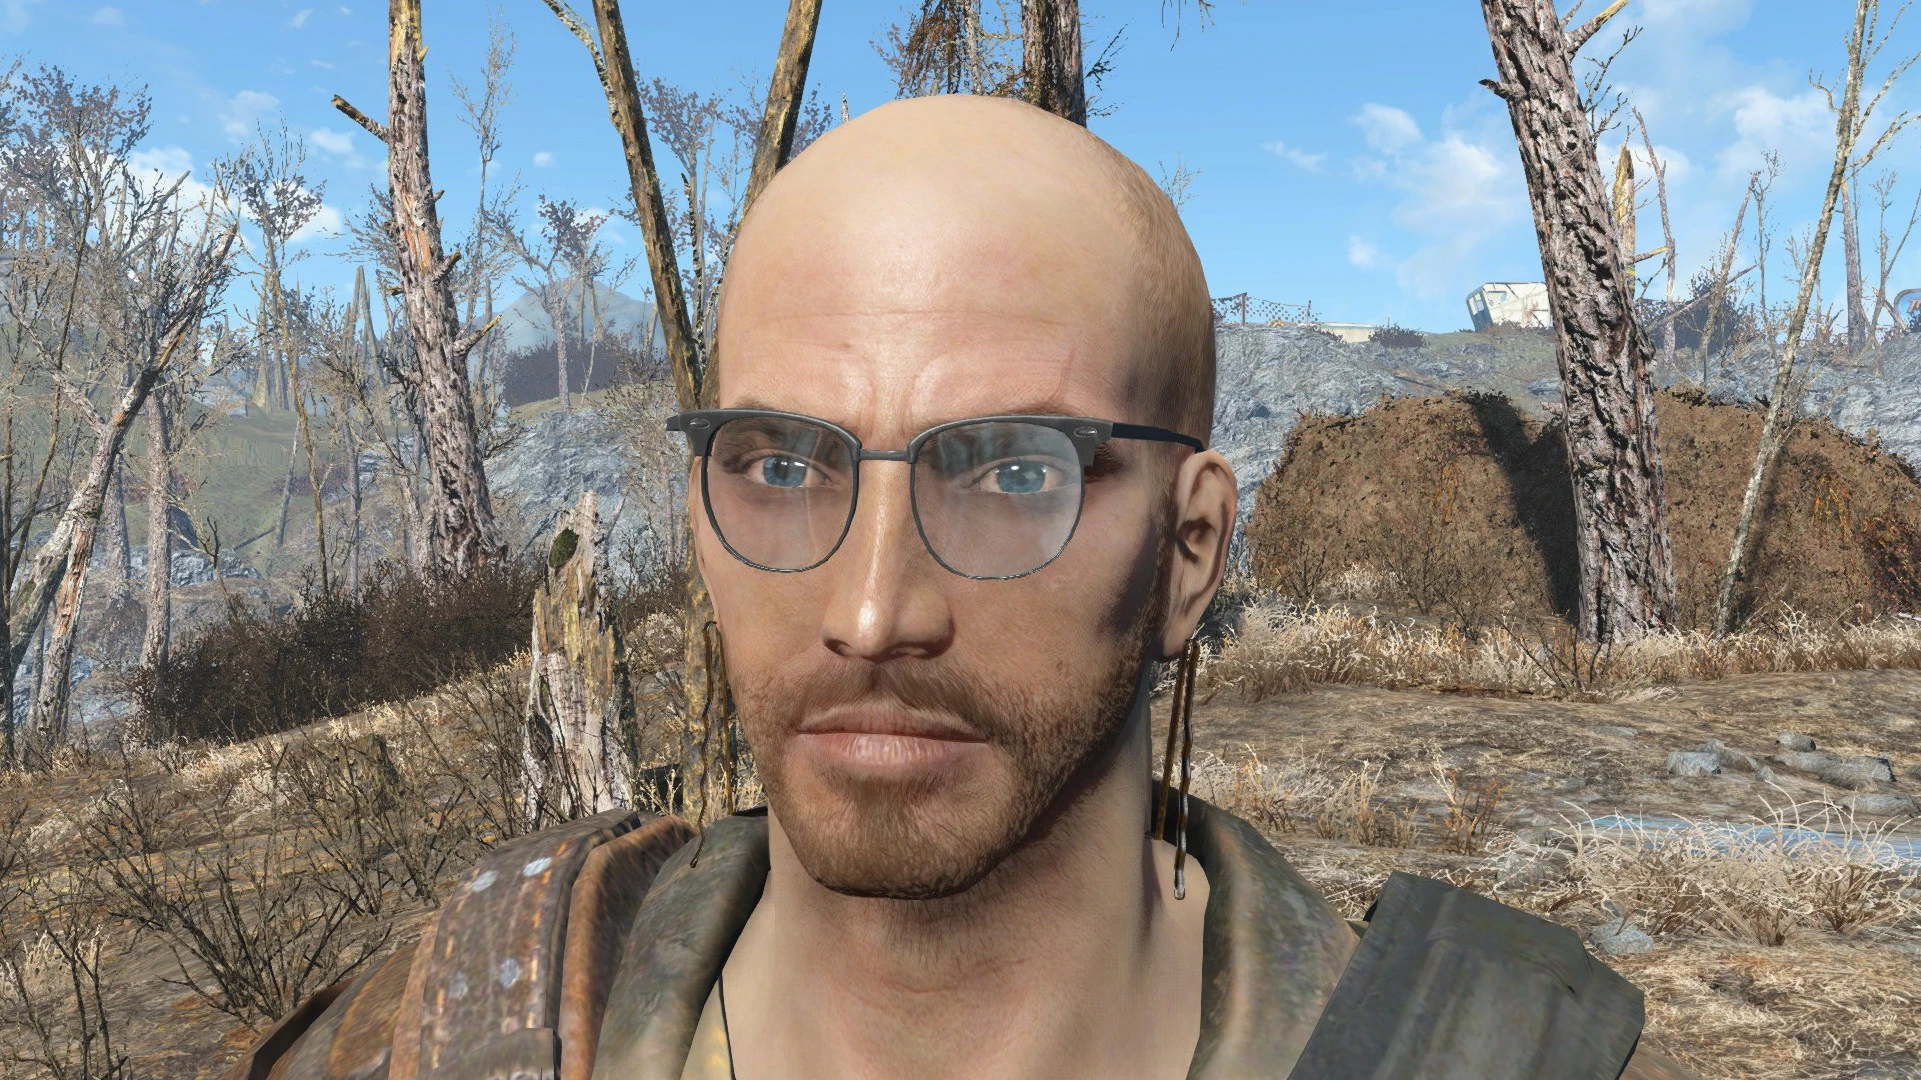 Bobby Pin Earrings at Fallout 4 Nexus - Mods and community
